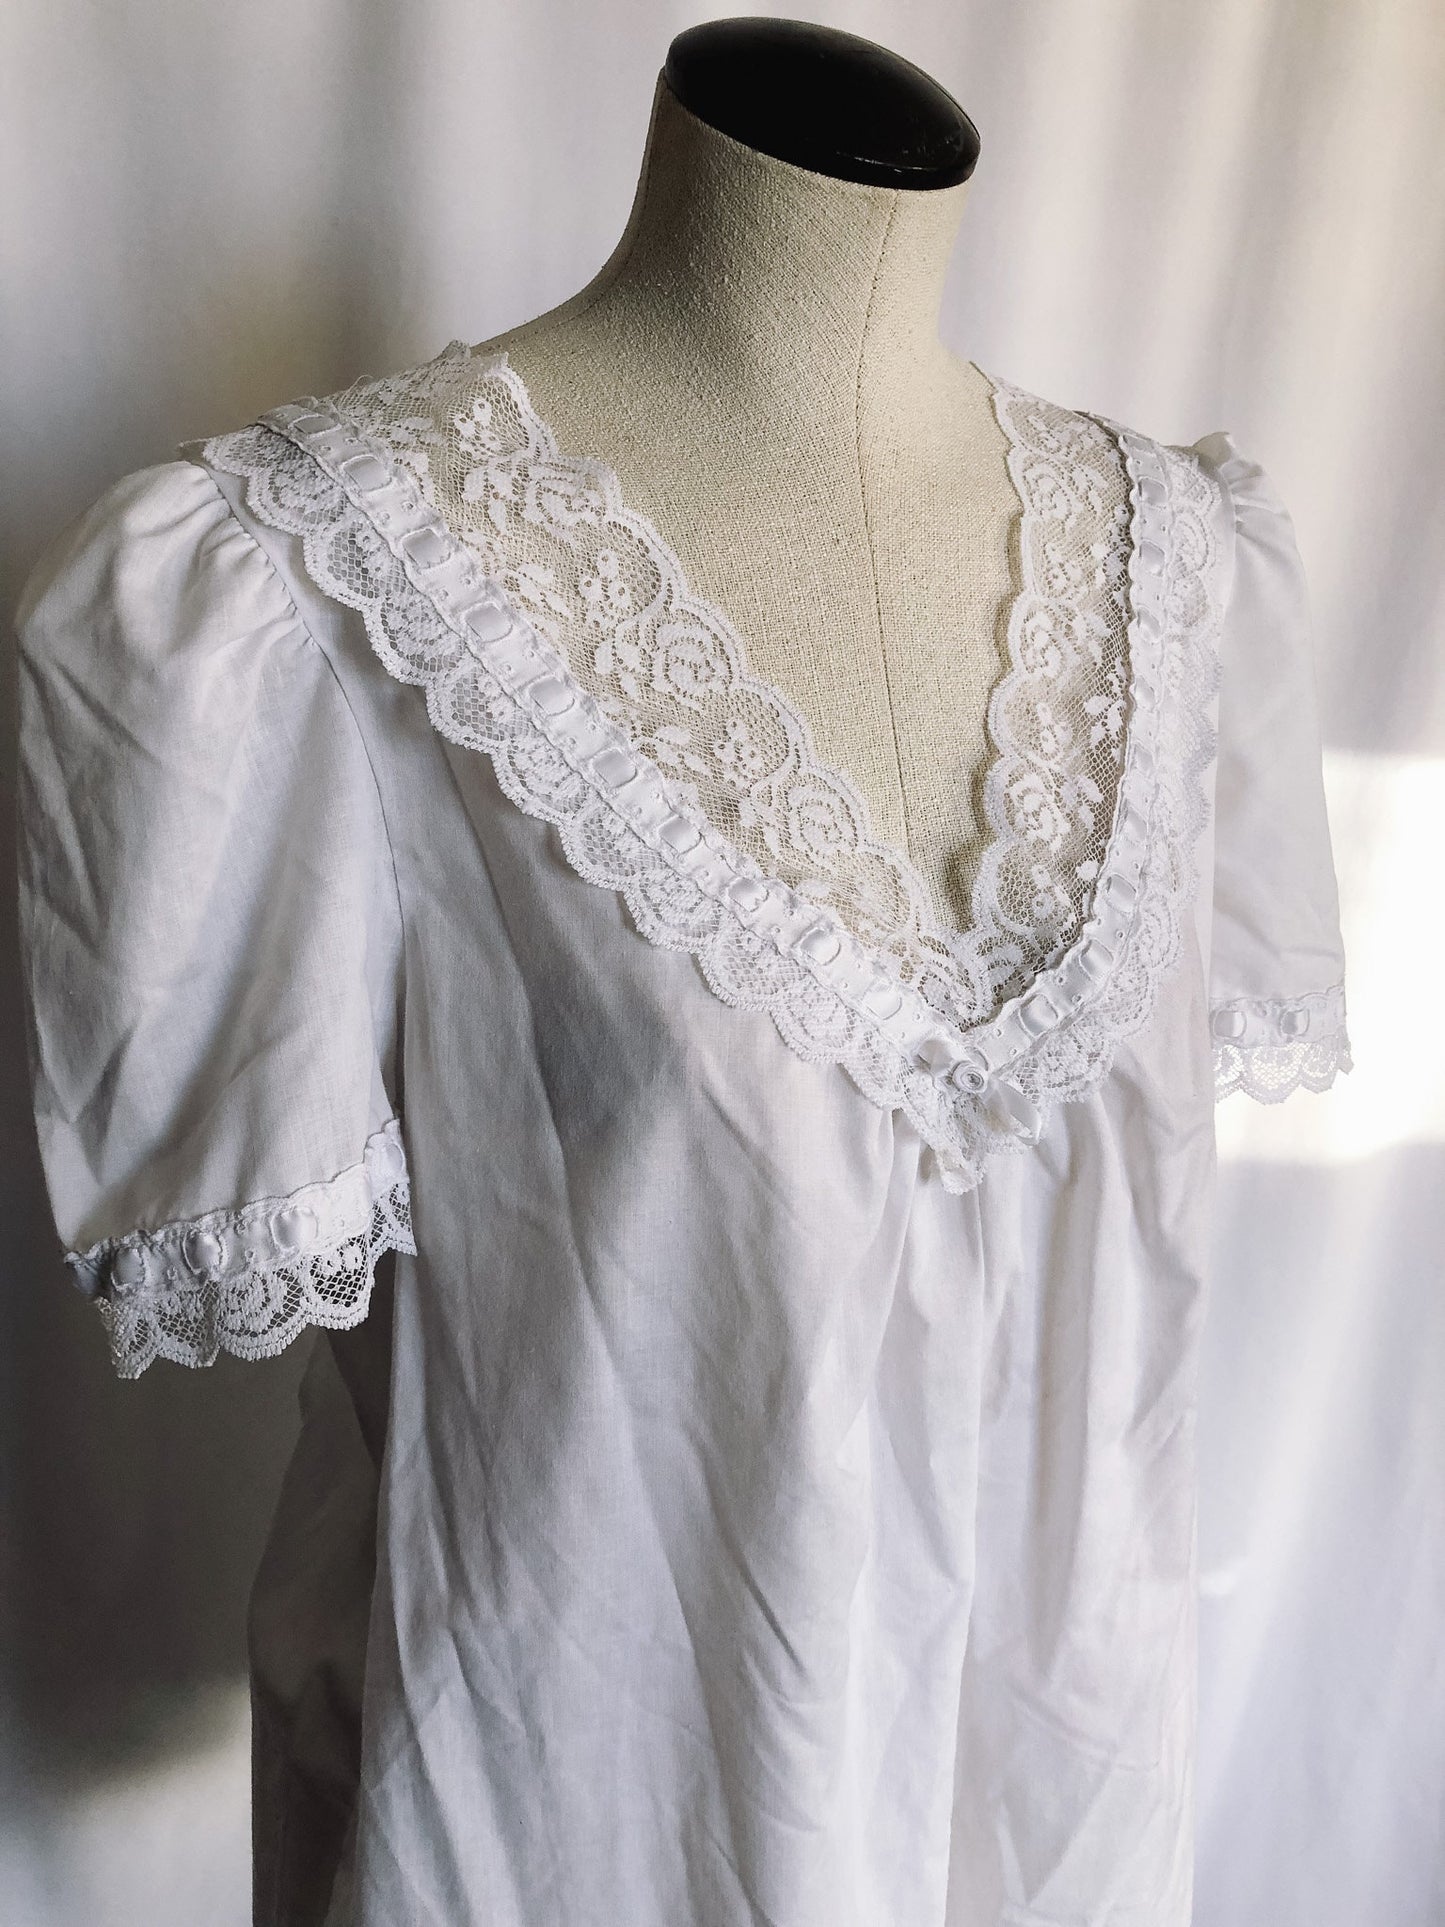 Vintage 90s Sears White and Lace Nightgown, Made in the USA, Sz. M 12/14